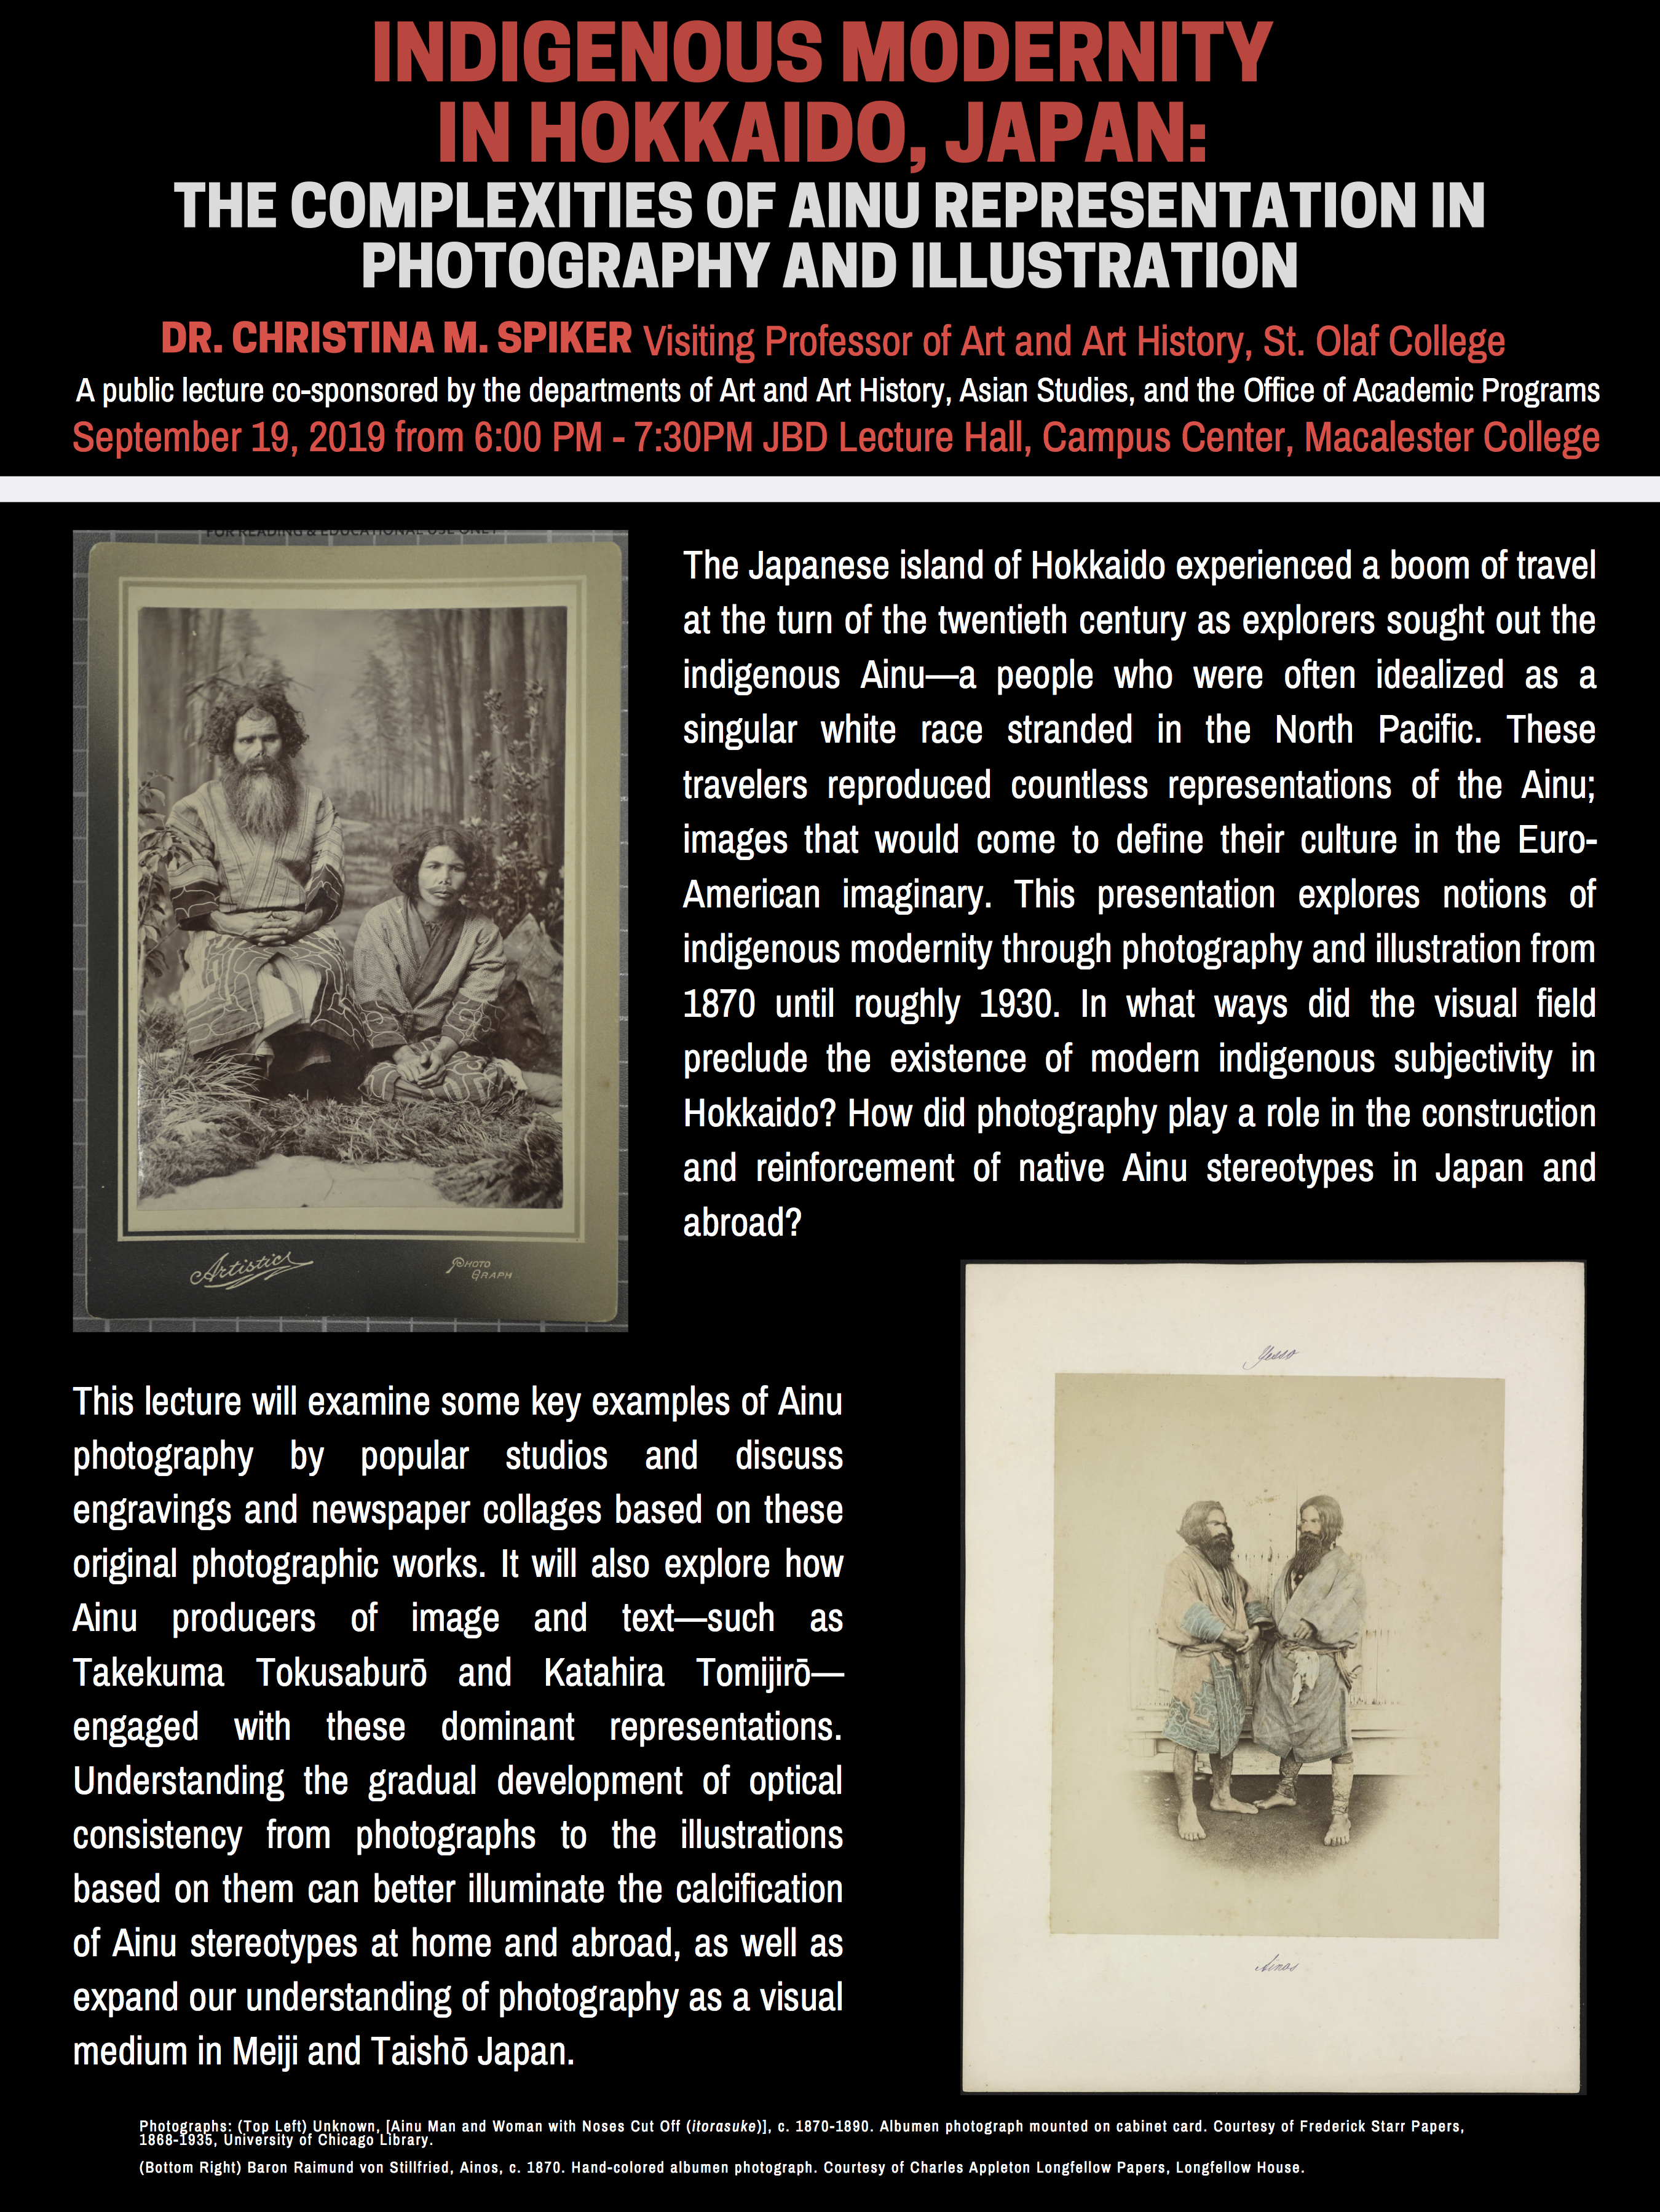 Public Lecture Indigenous Modernity In Hokkaido Japan The Complexities Of Ainu Representation In Photography And Illustration Macalester College Christina M Spiker